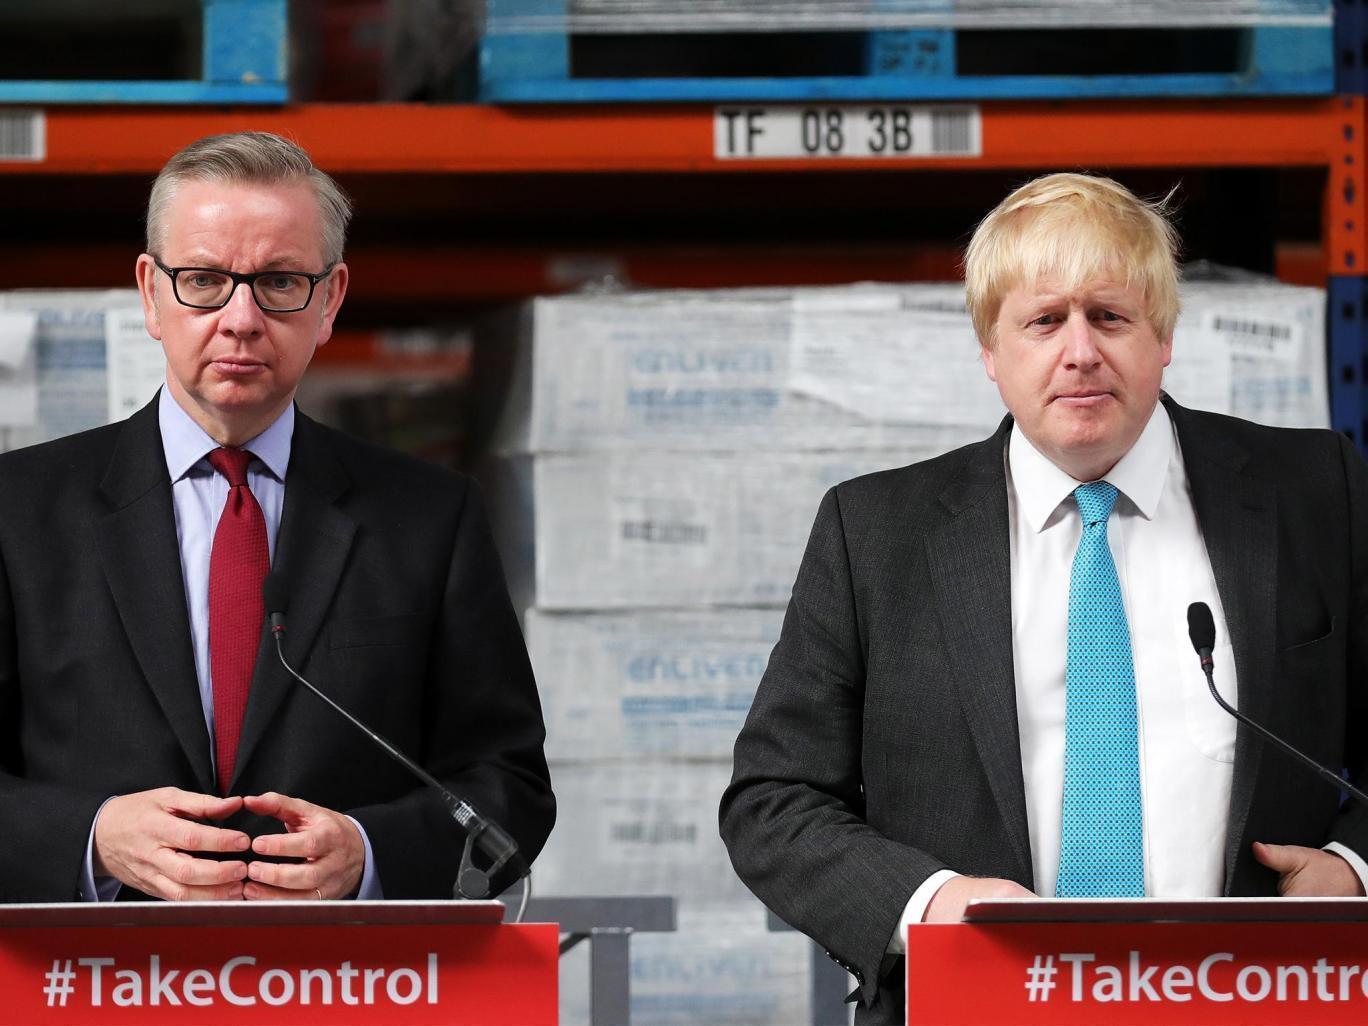 Michael Gove (left) and Boris Johnson and address workers during a Vote Leave campaign in Stratford-Upon-Avon